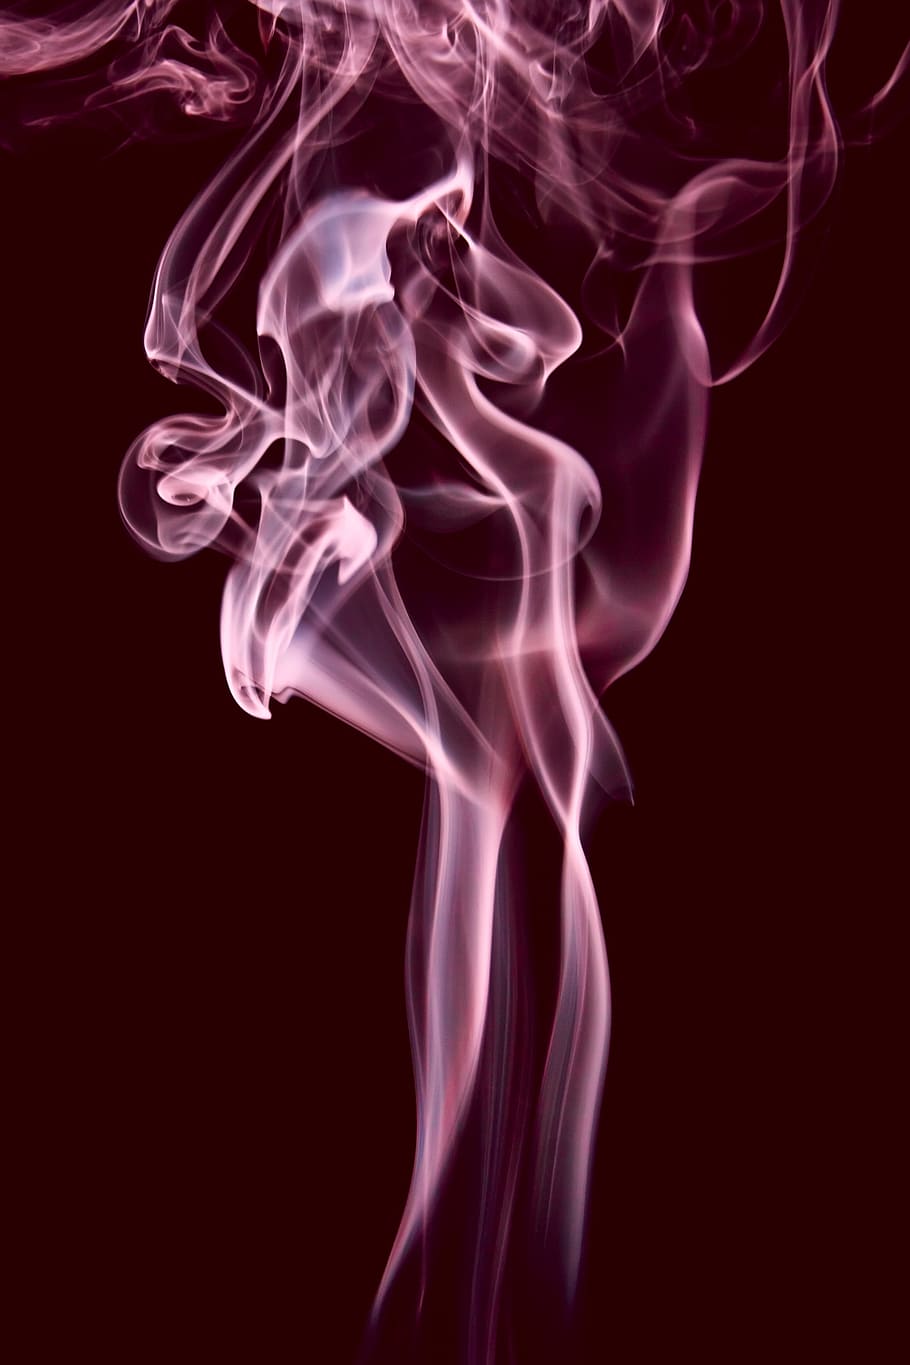 smoke, smell, color, aroma, abstract, background, aromatherapy, studio shot, smoke - physical structure, motion